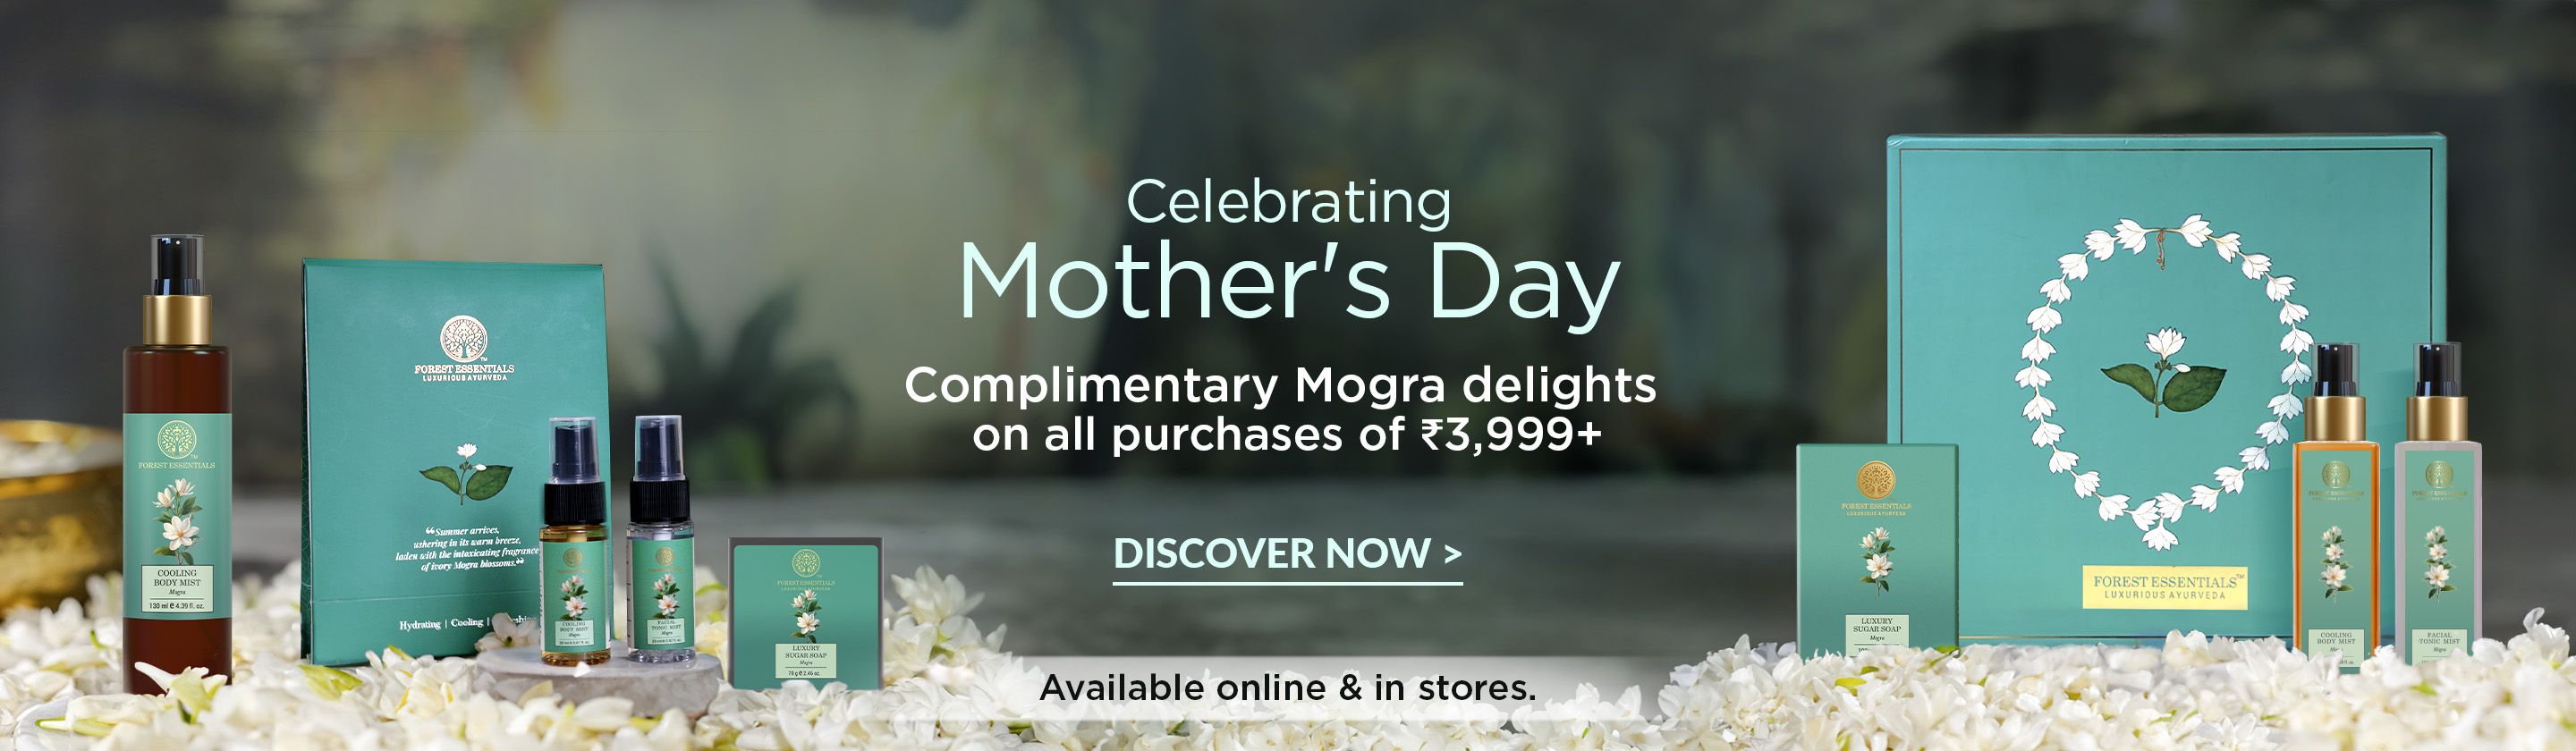 Mother’s Day GWP